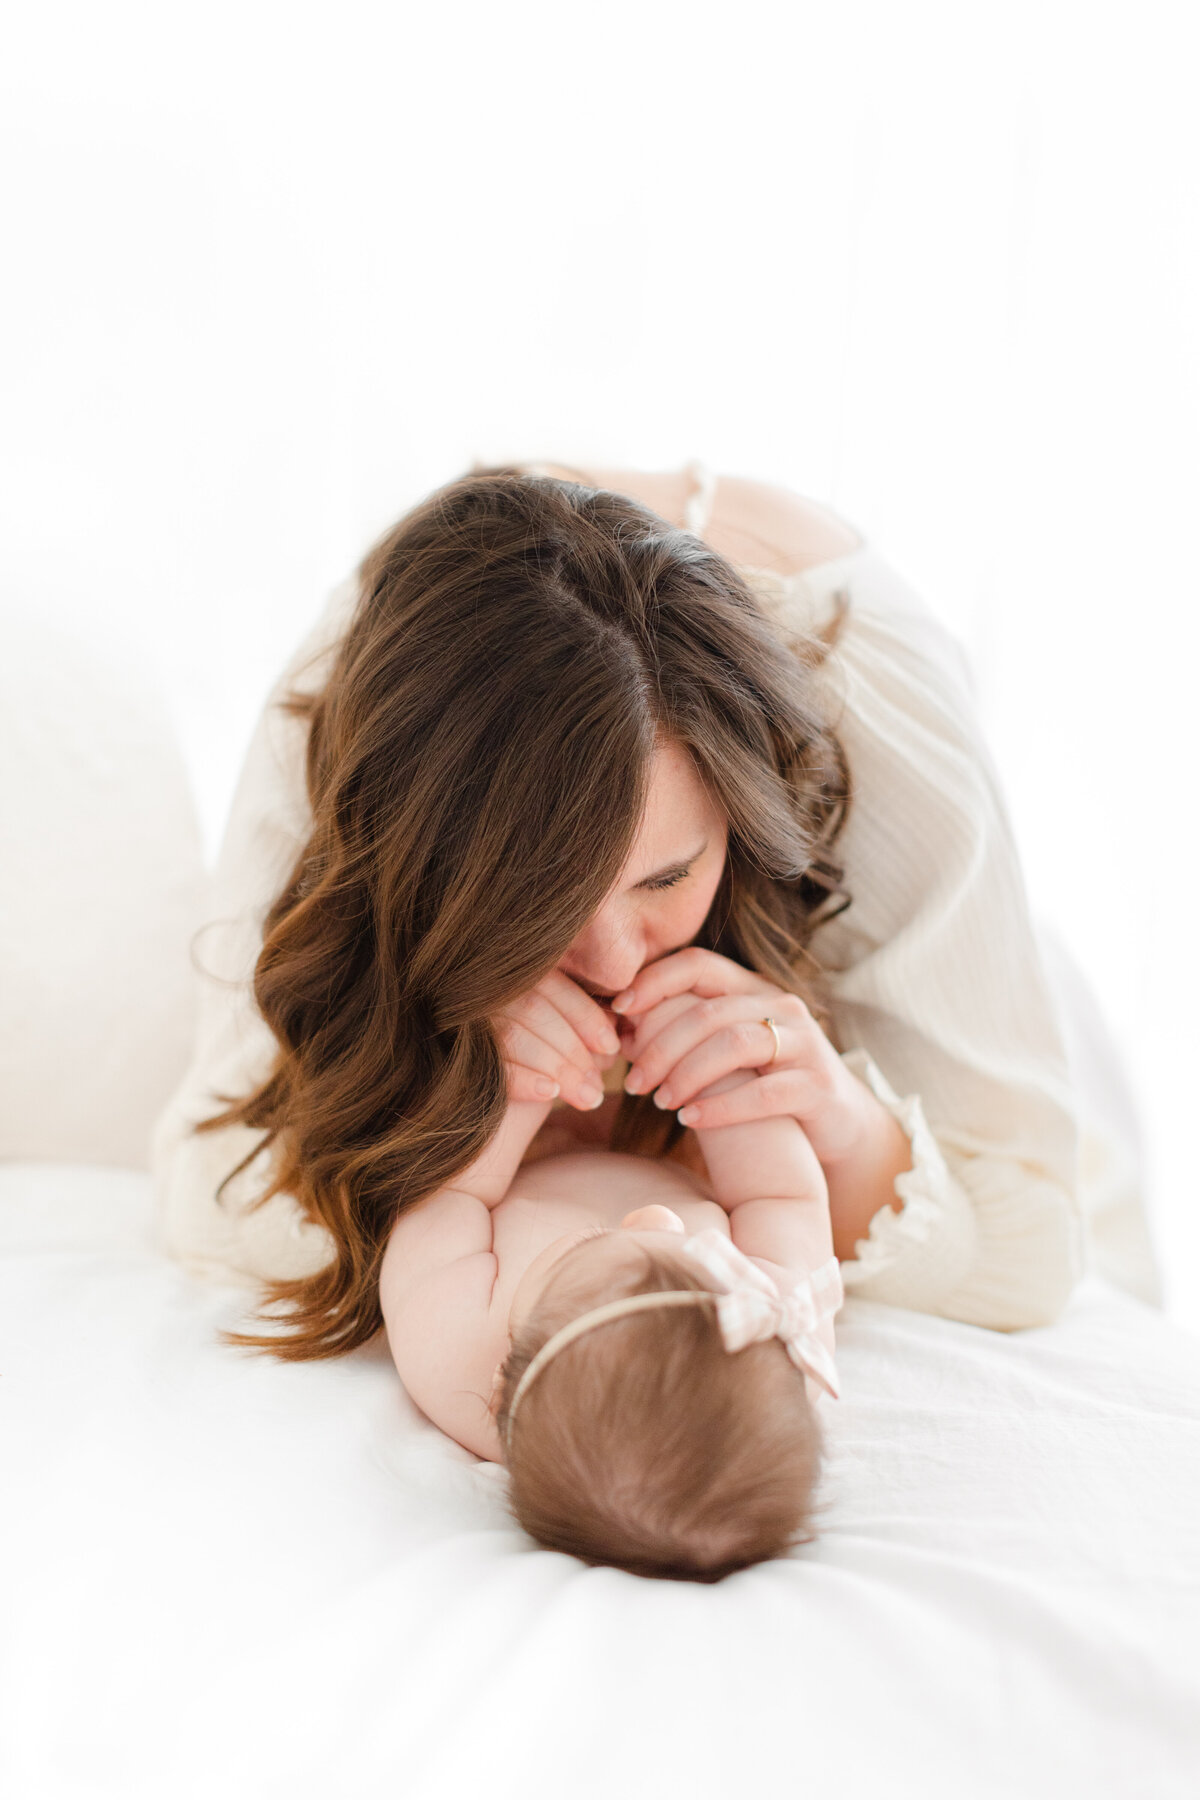 A Baby Photography photo in Northern Virginia of a  mother kissing her daughter's hands on a white bed